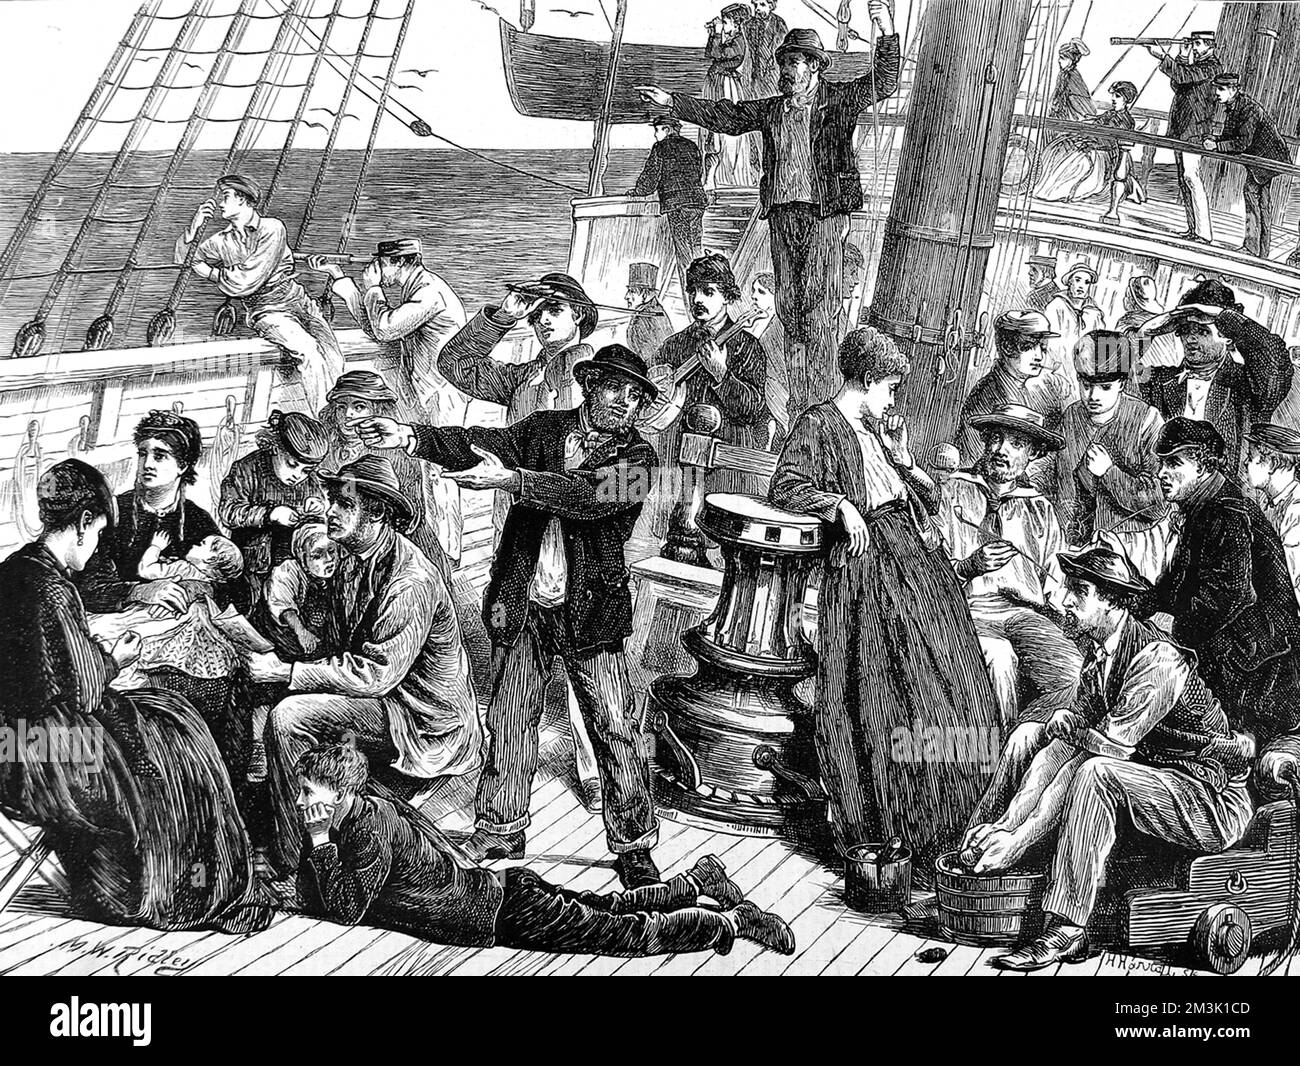 A scene on the deck of an emigrant ship, as the passengers sight land. In the foreground a lady is sewing and a family with very young children look anxiously towards land. Sailors are using telescopes to confirm the sighting of land, whilst musicians are playing the banjo and the violin. Stock Photo